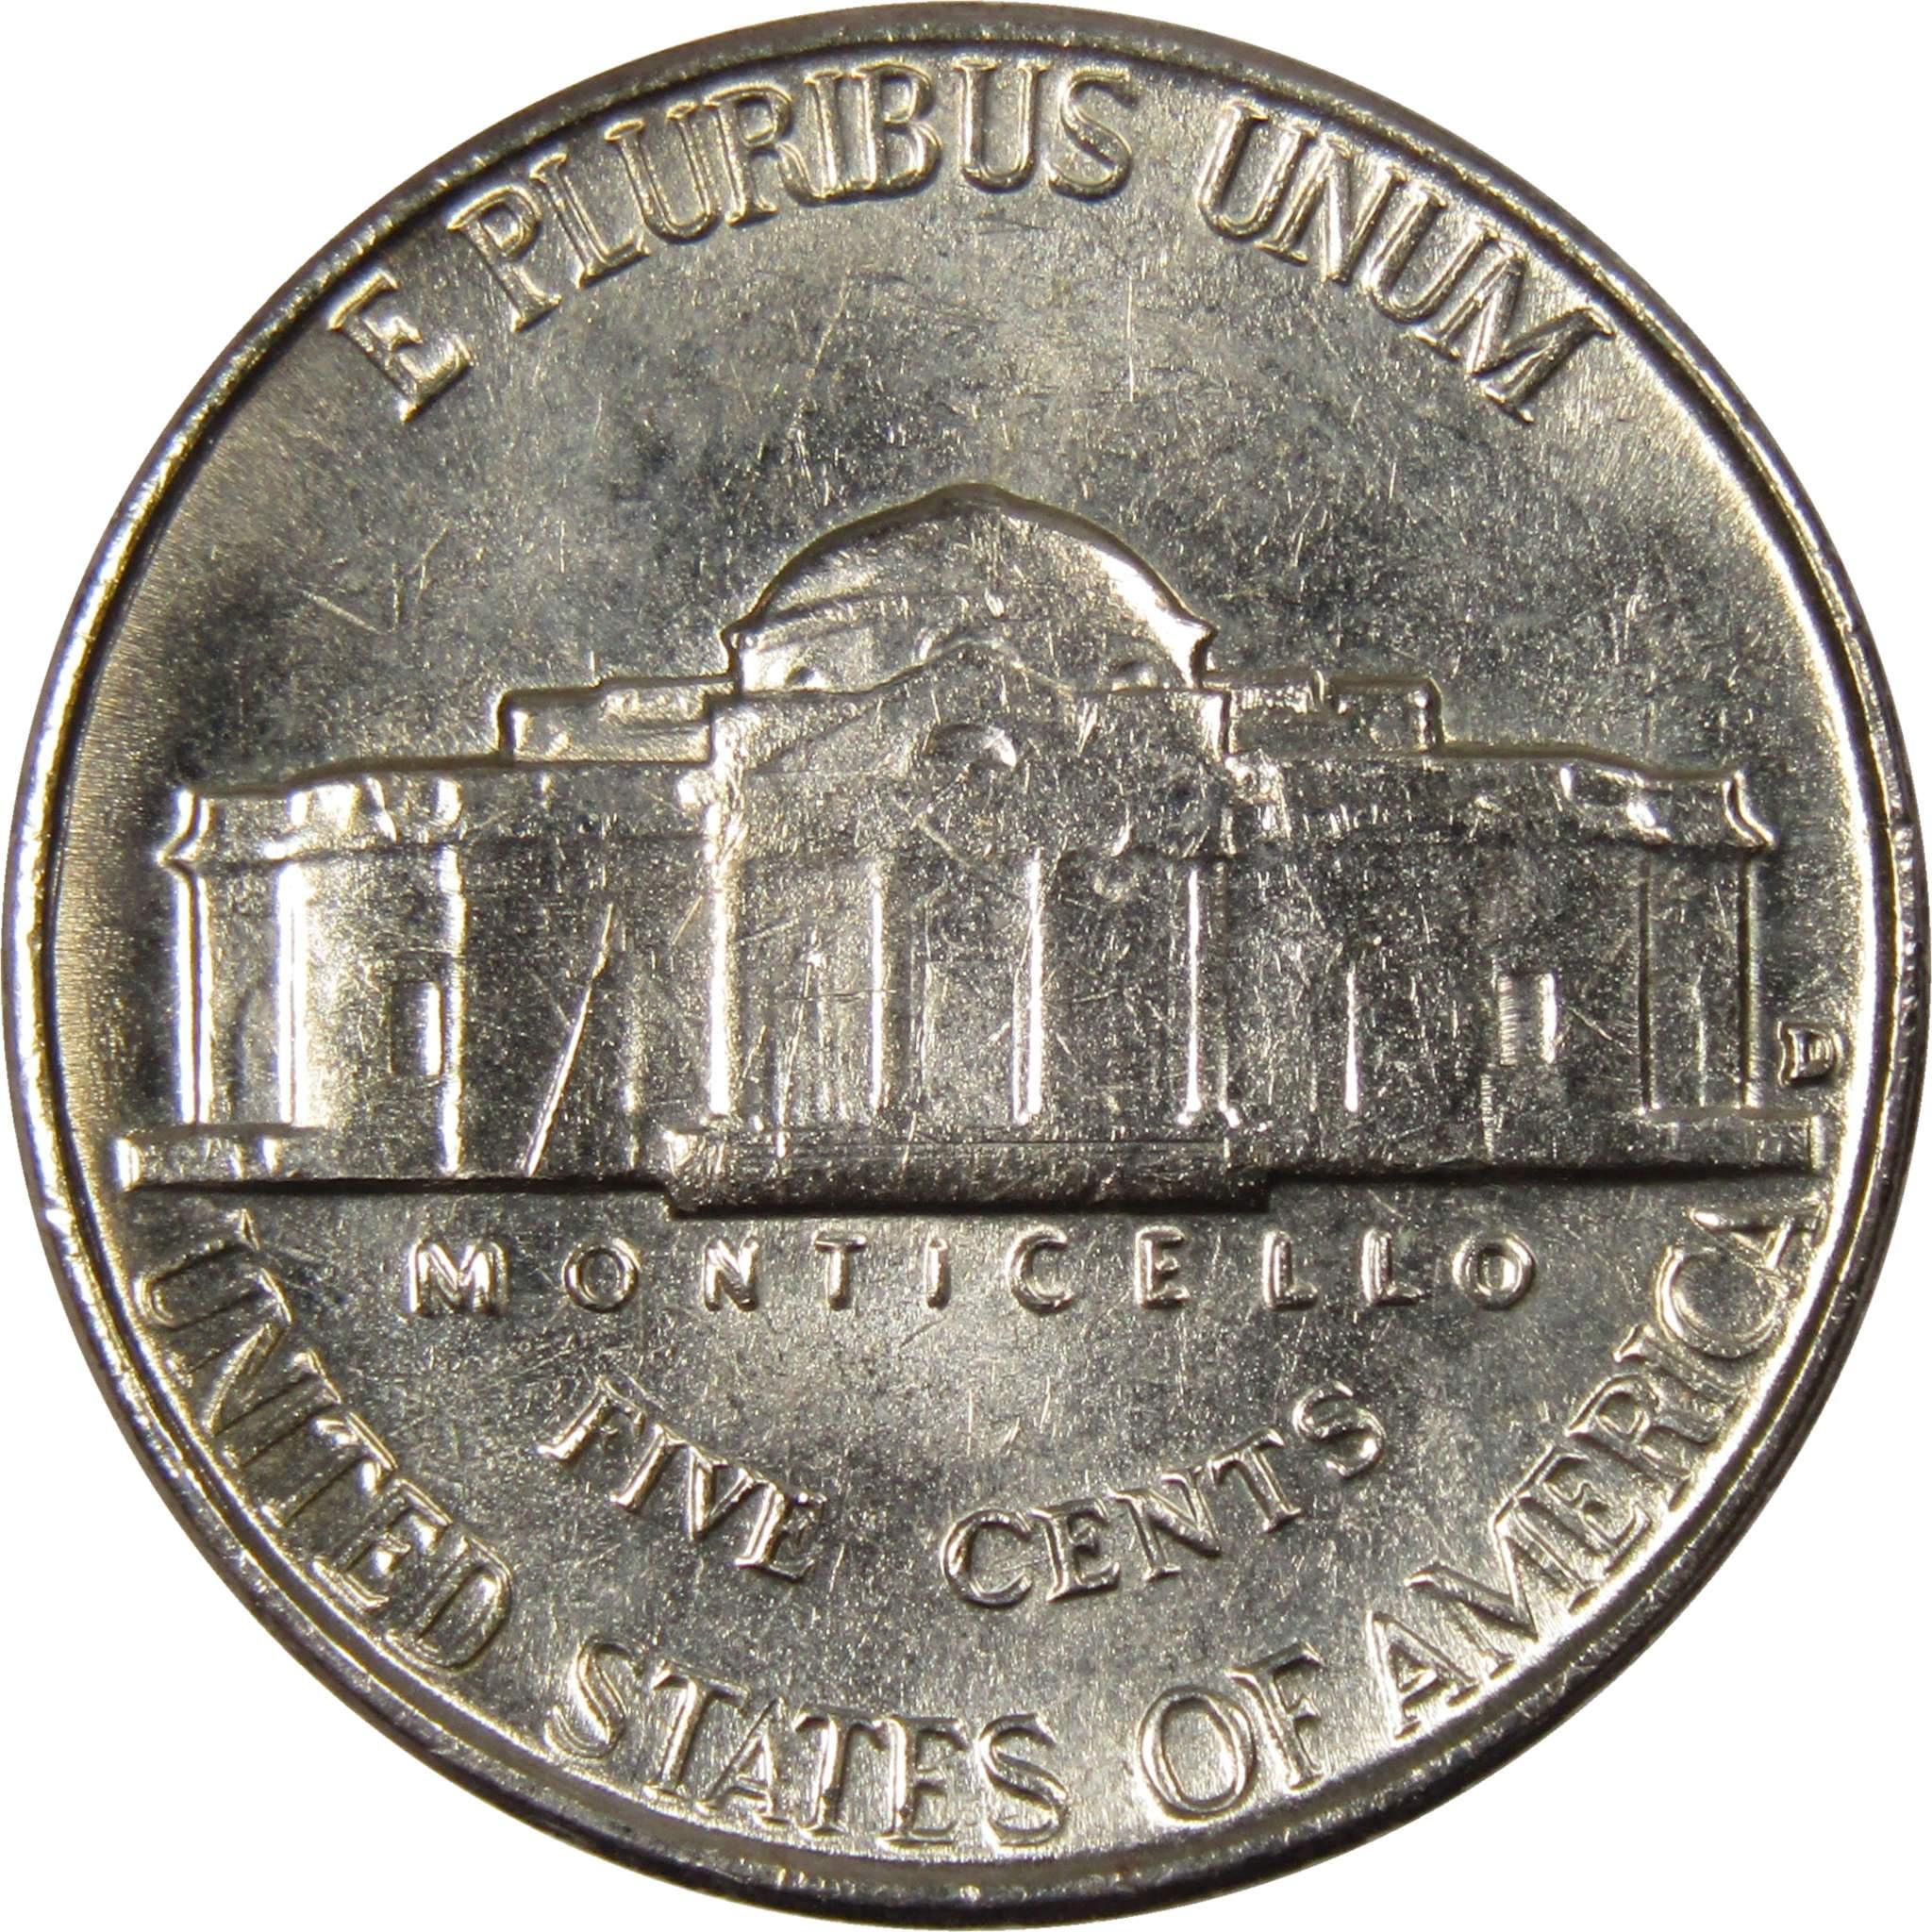 1953 D Jefferson Nickel 5 Cent Piece BU Uncirculated Mint State 5c US Coin